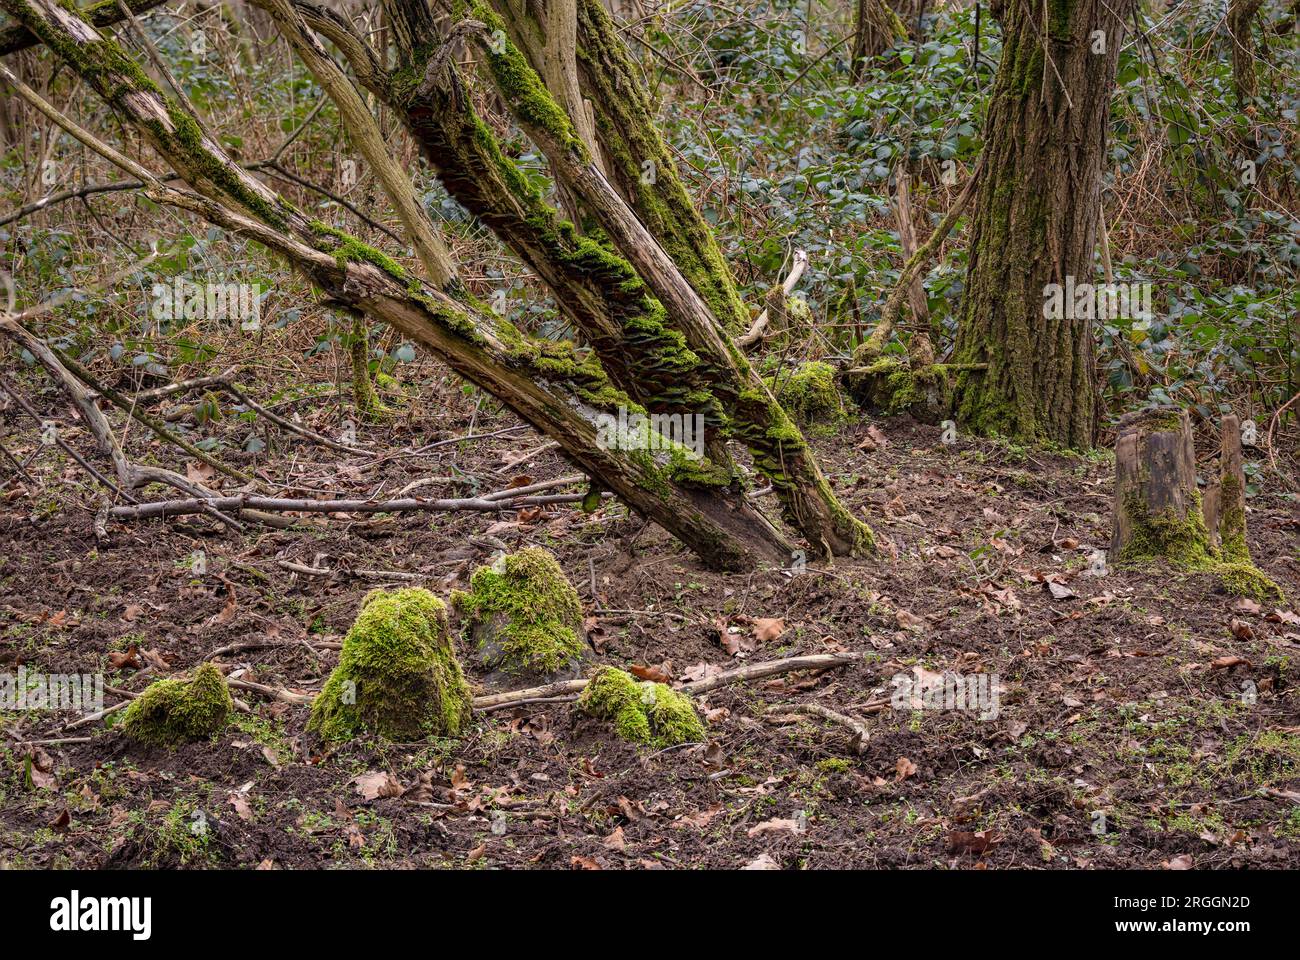 A bush overgrown with mushrooms and moss in winter in forest with many leaves on the ground, Germany Stock Photo